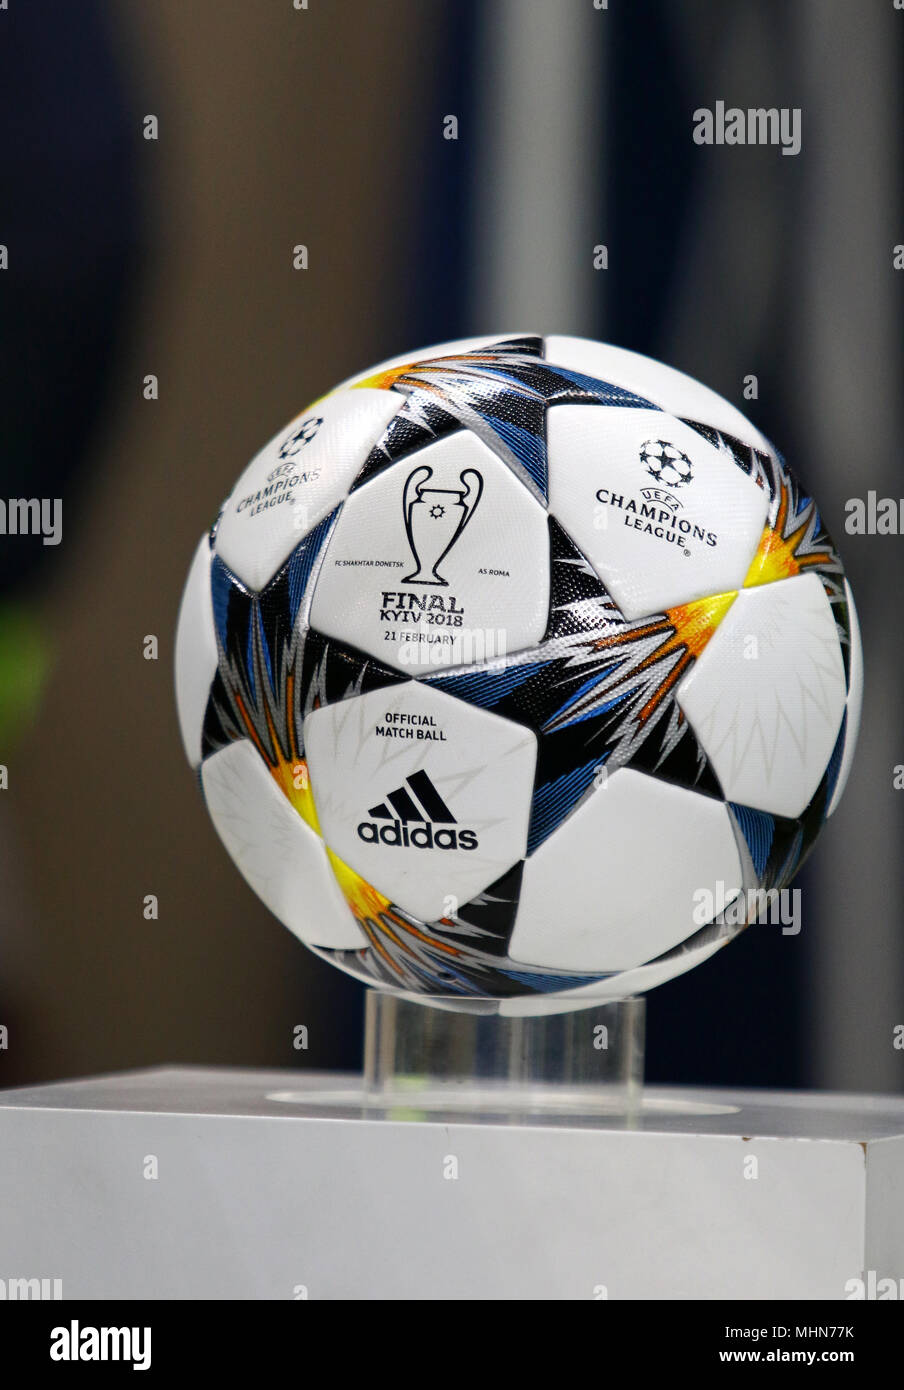 KHARKIV, UKRAINE - FEBRUARY 21, 2018: Official match ball of UEFA Champions  League season 2017/18 on pedestal before Champions League Round of 16 game  Stock Photo - Alamy